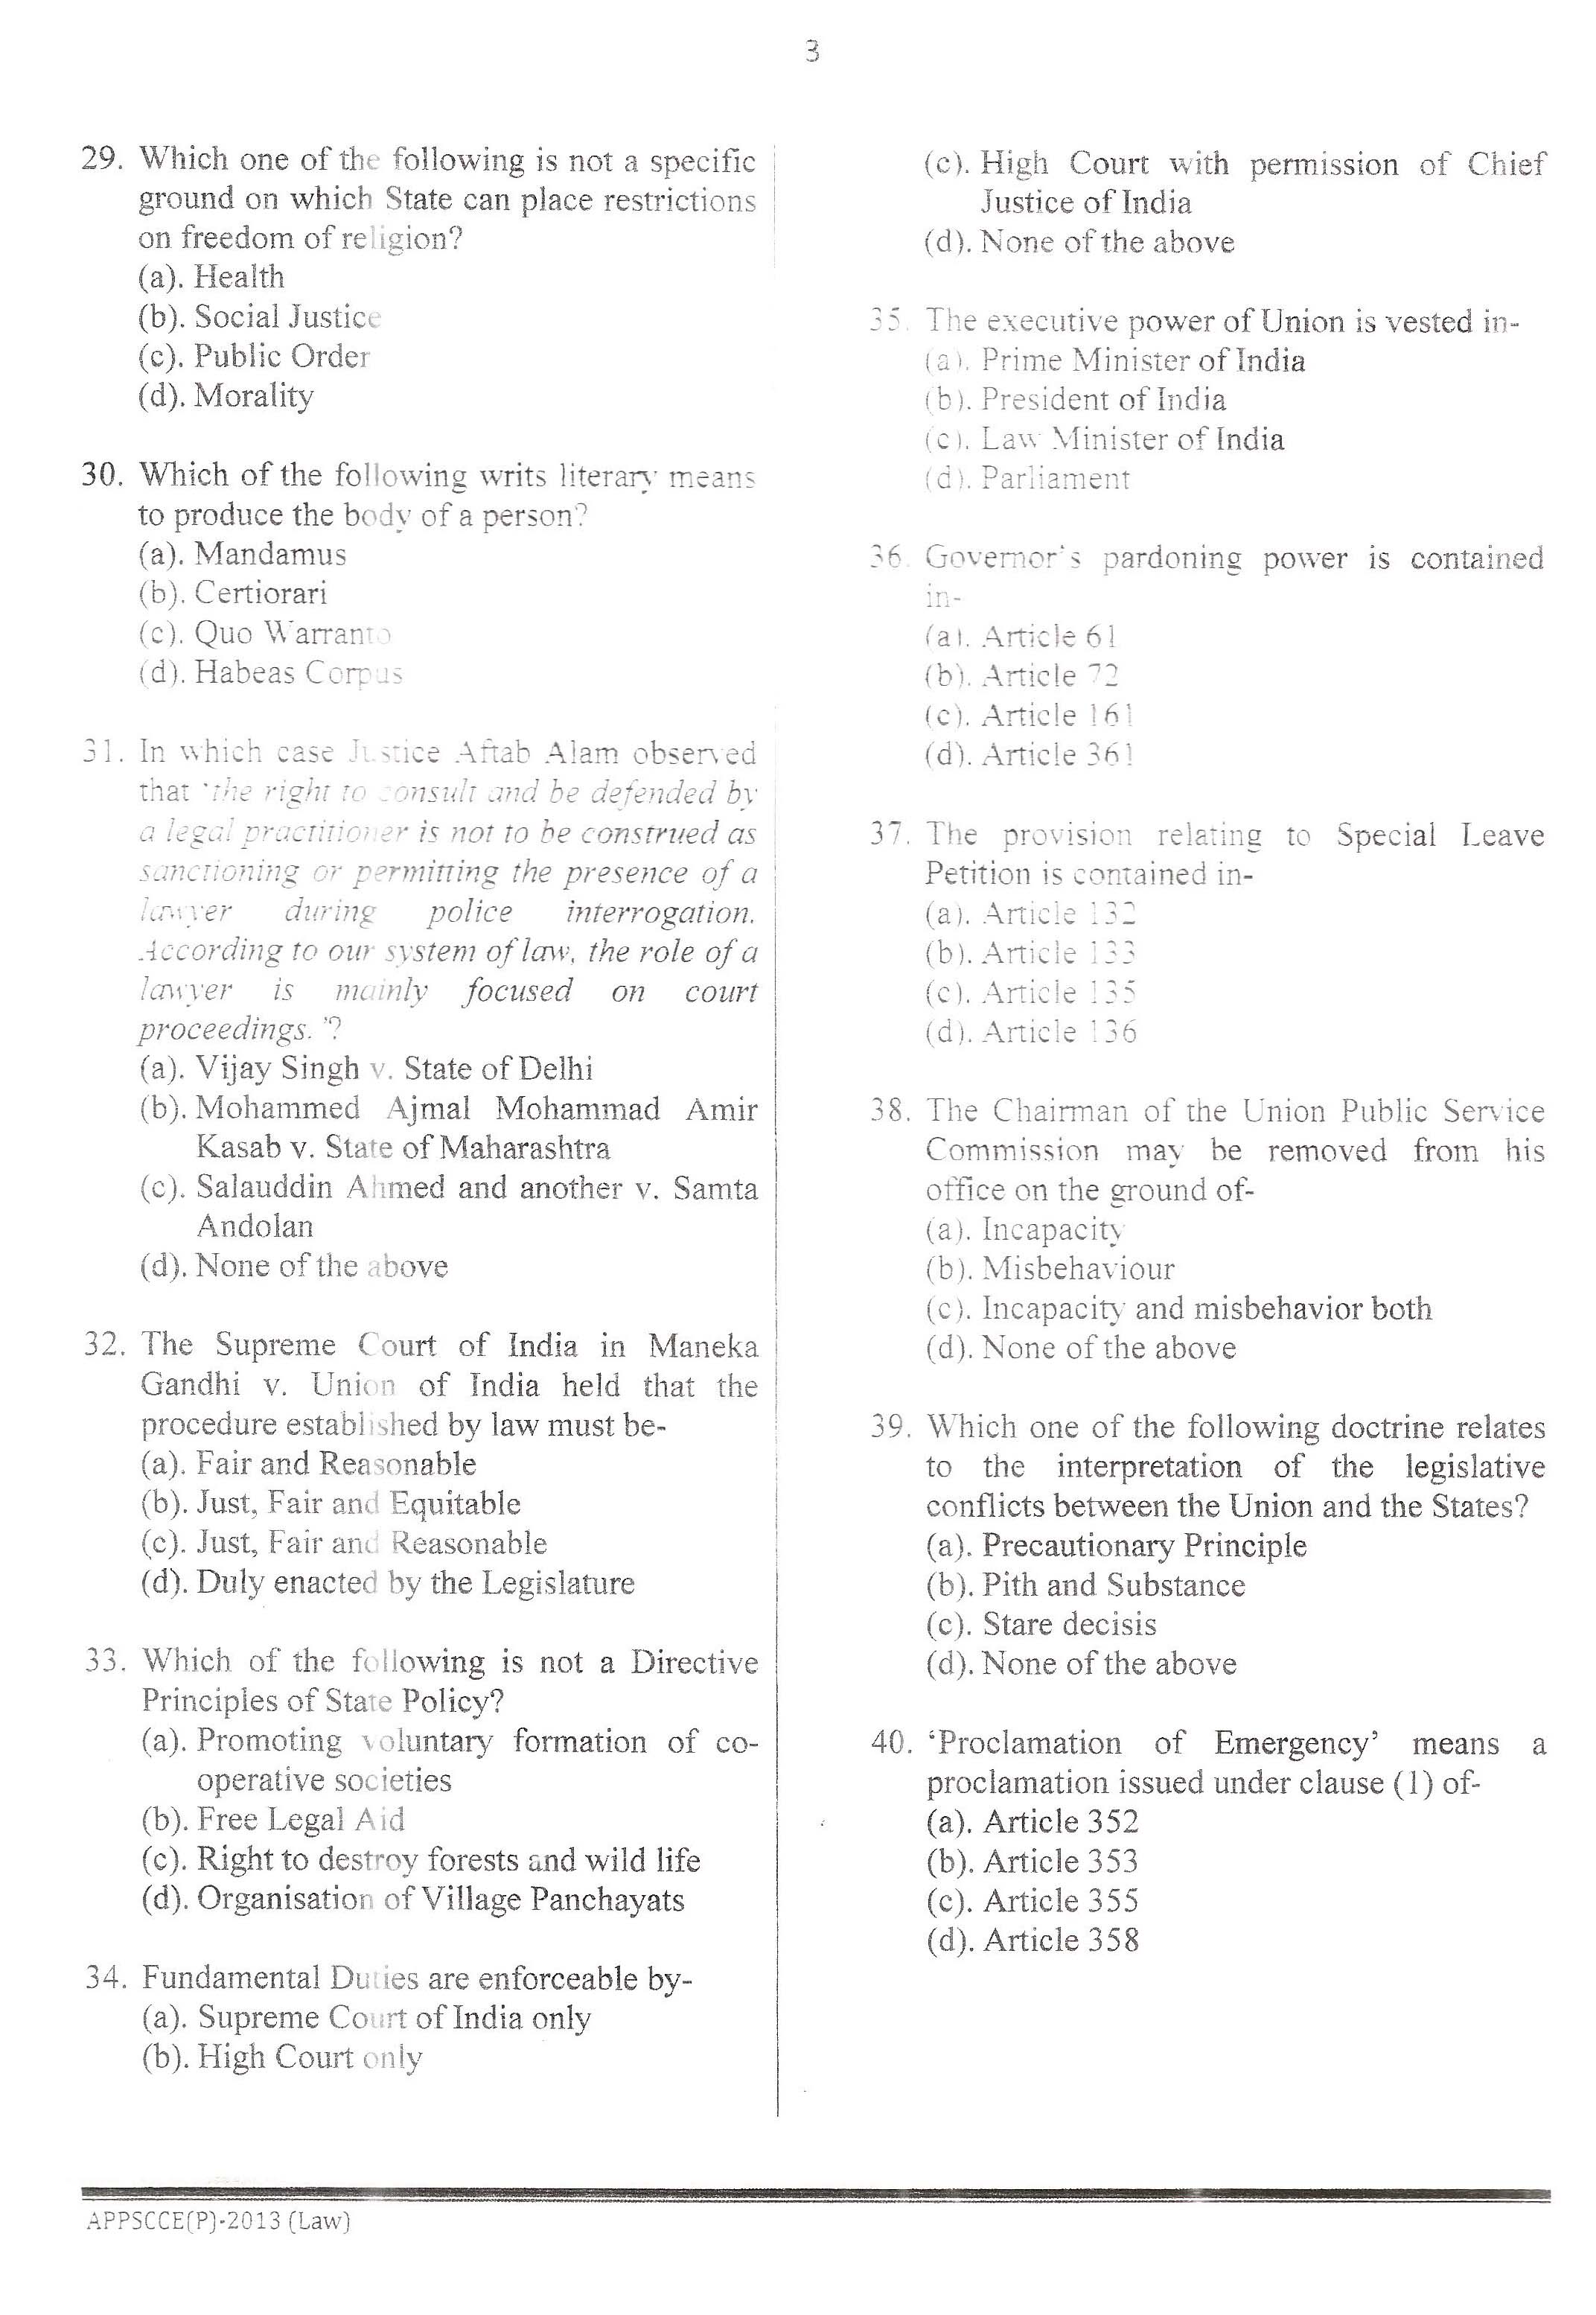 APPSC Combined Competitive Prelims Exam 2013 Law 4